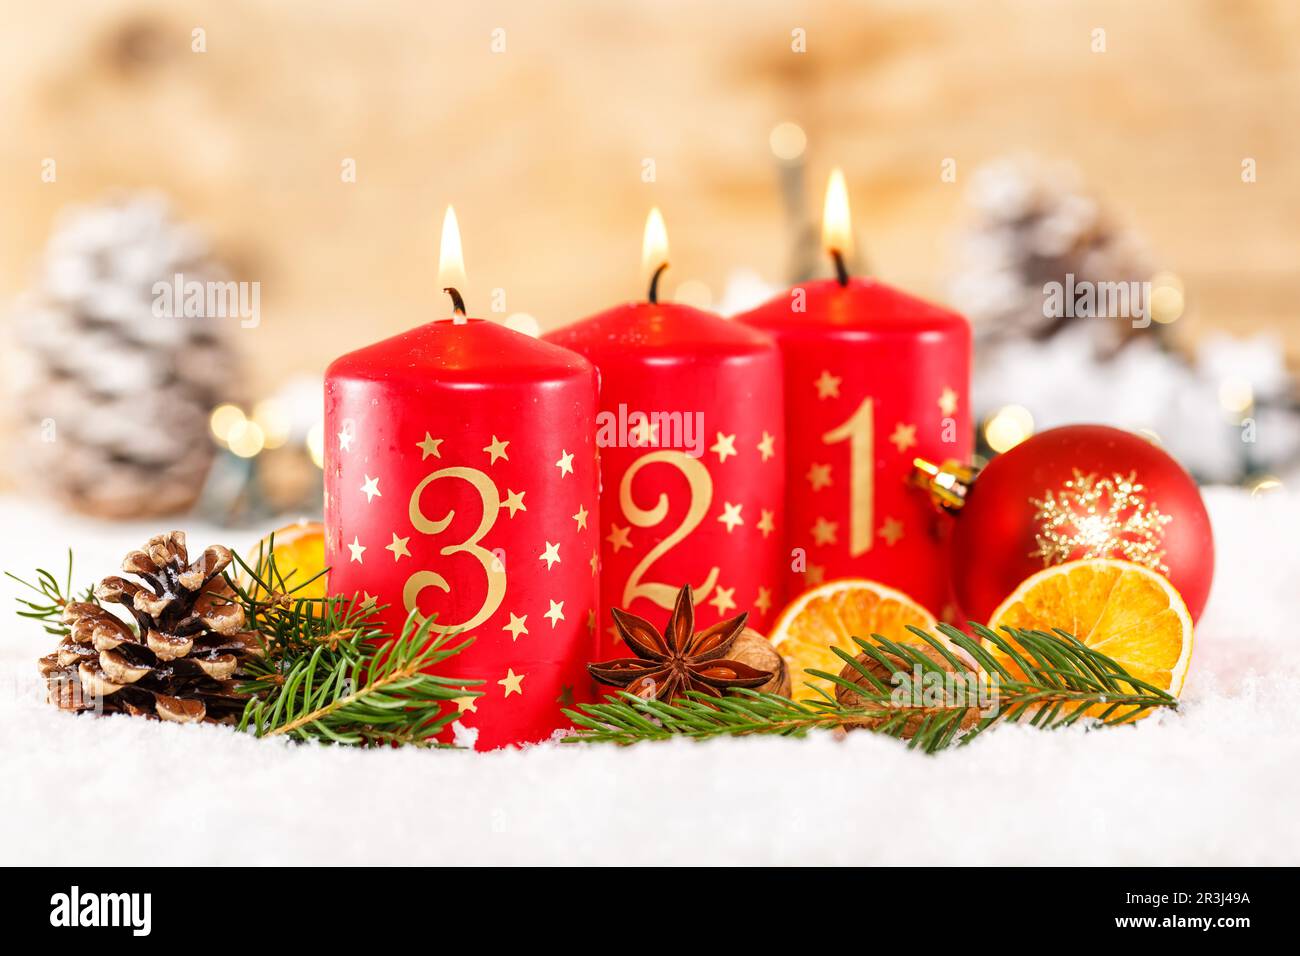 Third 3rd Advent Christmas Advent Decoration Stock Candle Alamy Decoration Season Photo Christmas - with